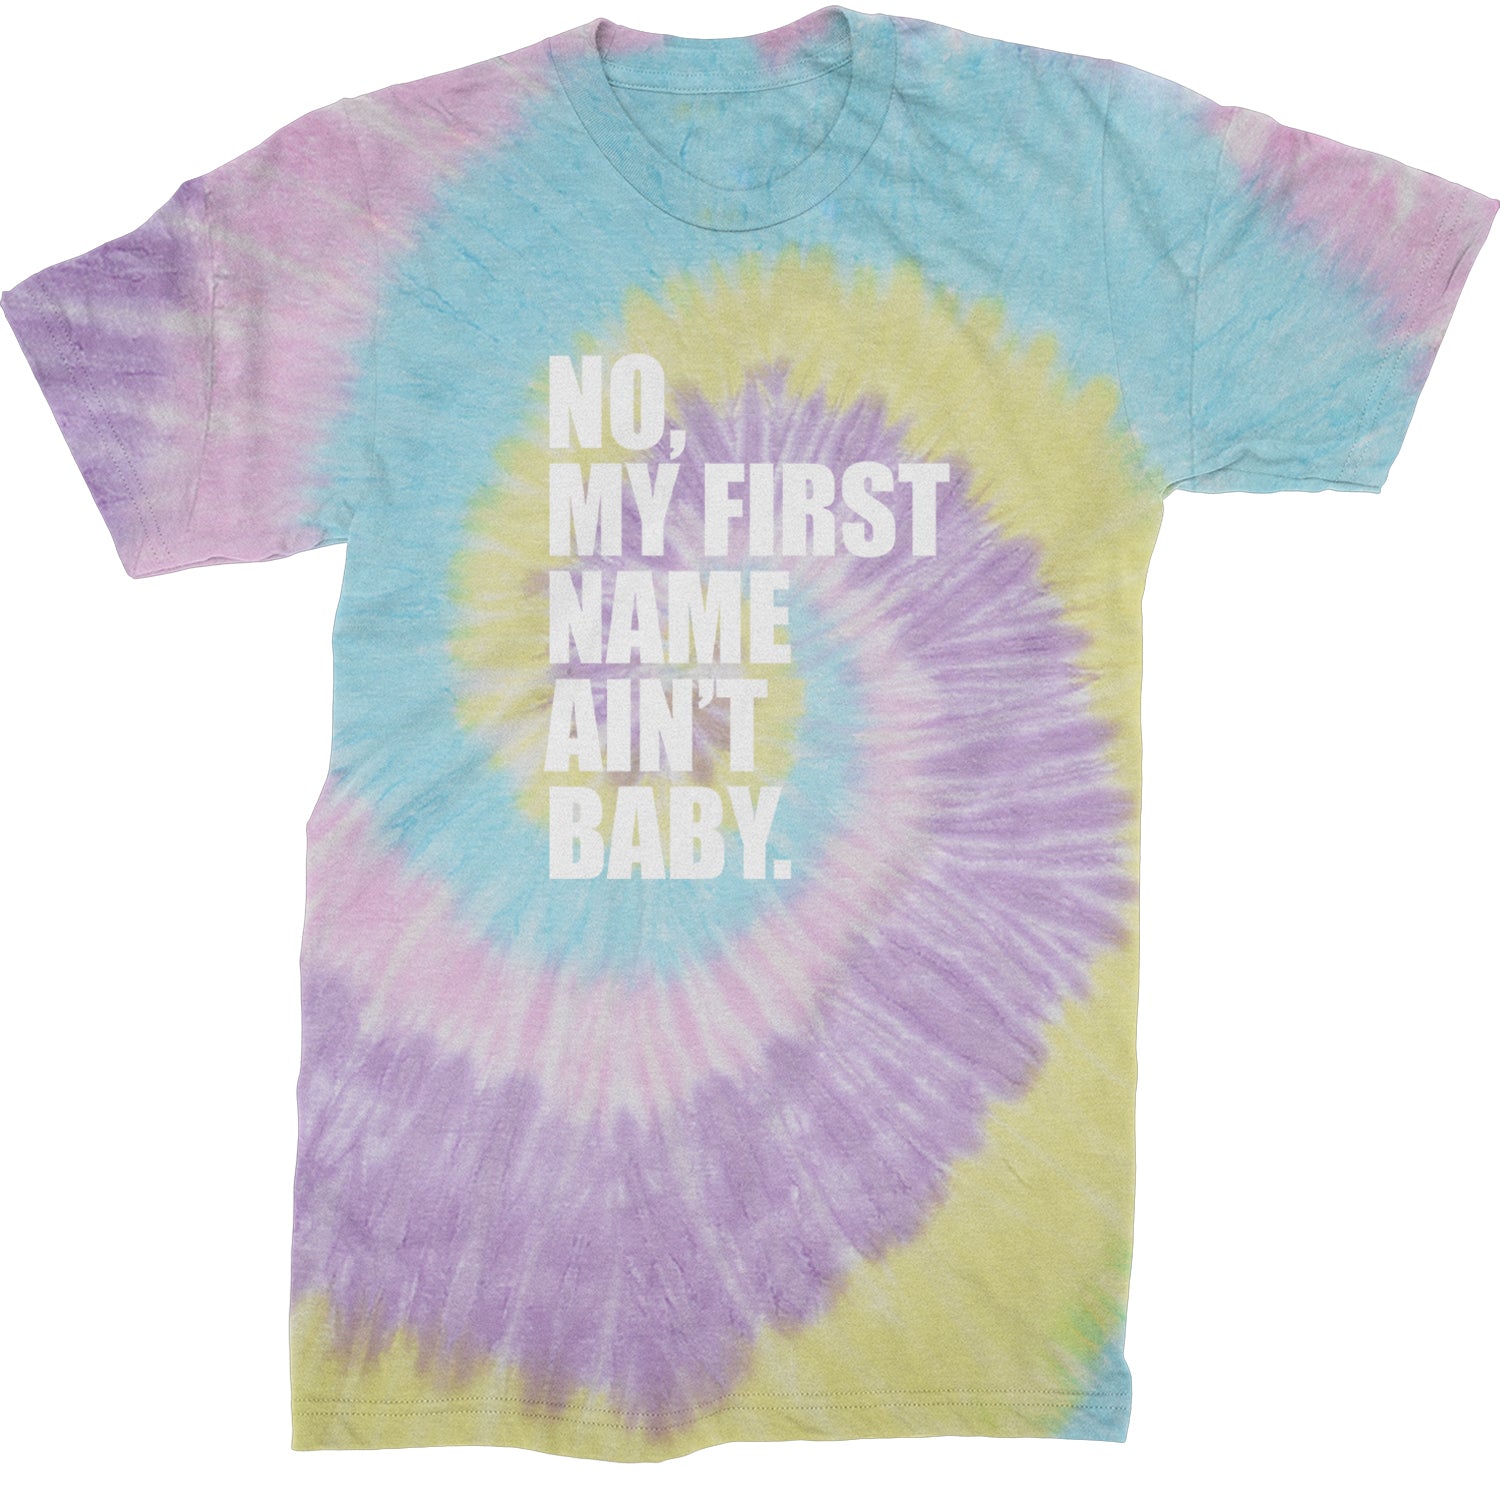 No My First Name Ain't Baby Together Again Mens T-shirt Tie-Dye Jellybean